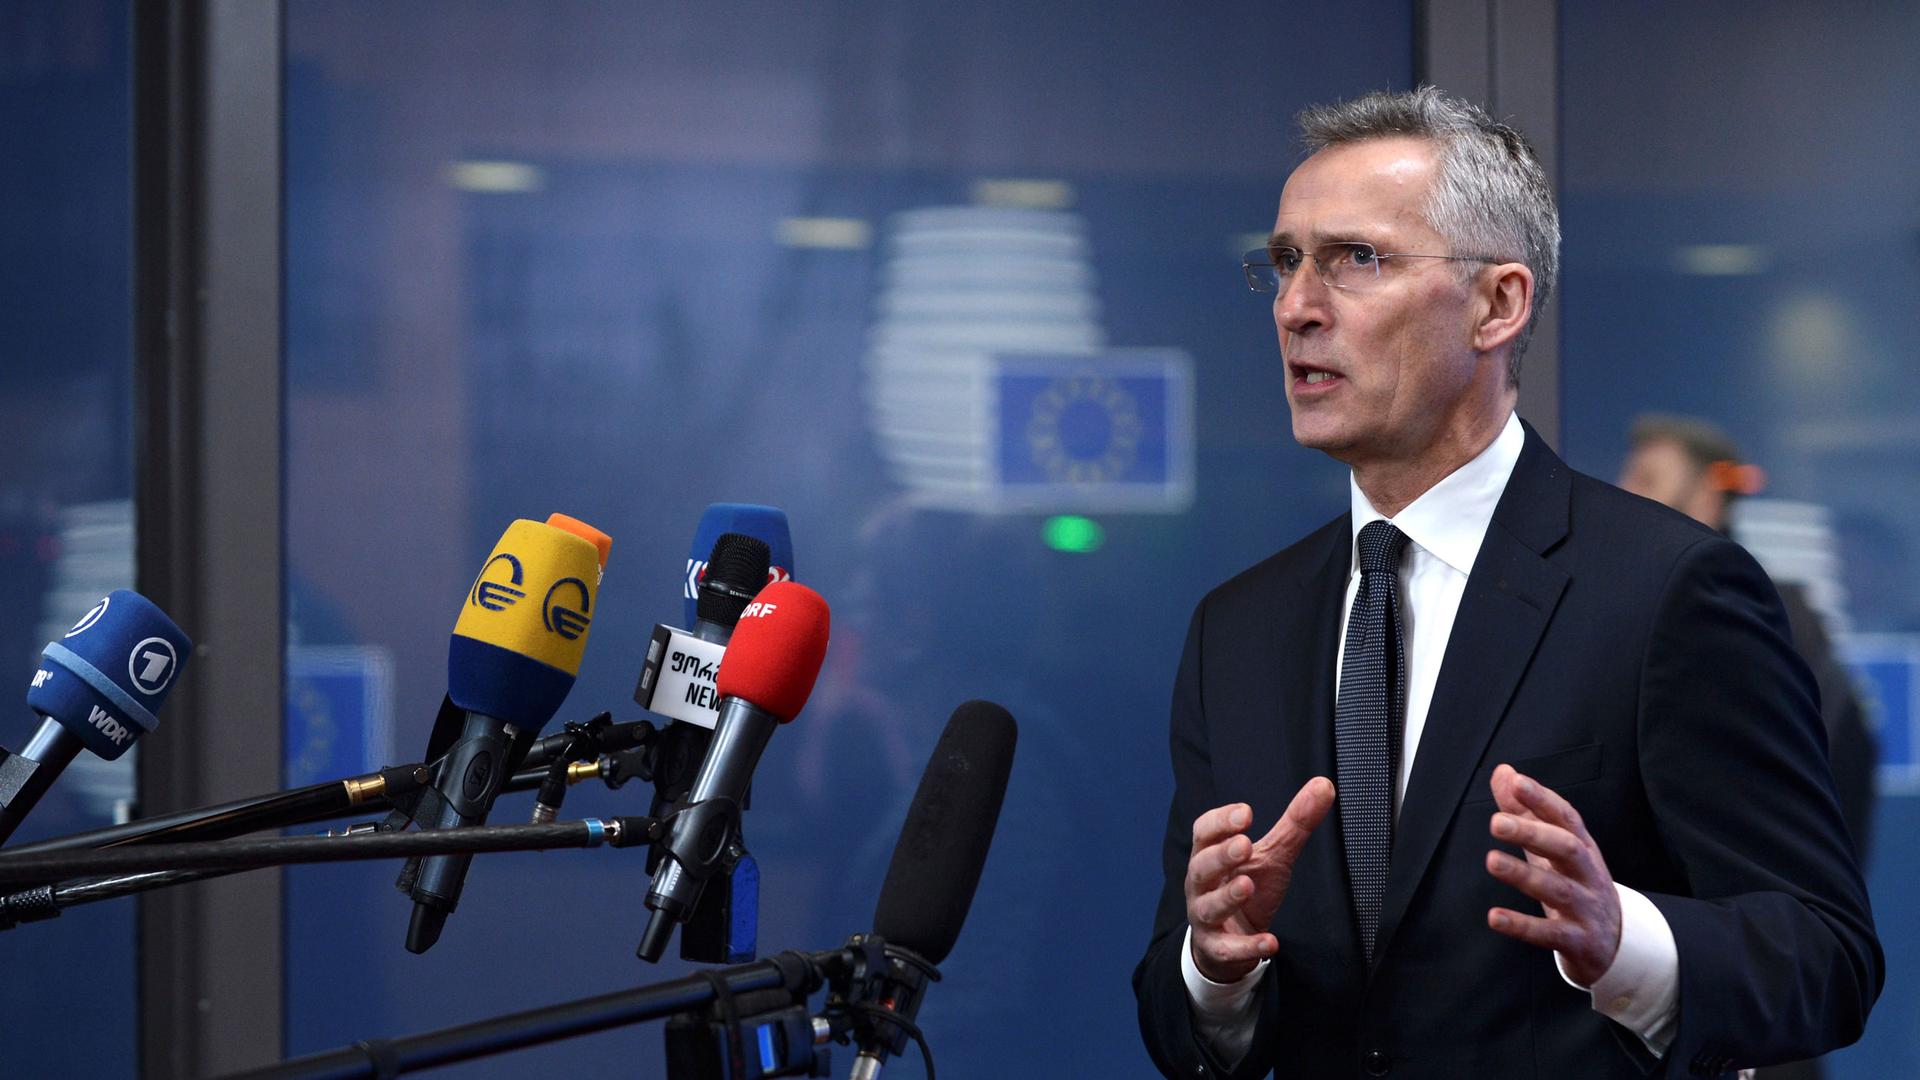 NATO Secretary General Jens Stoltenberg is shown wearing a dark suit and standing in front of several microphones.